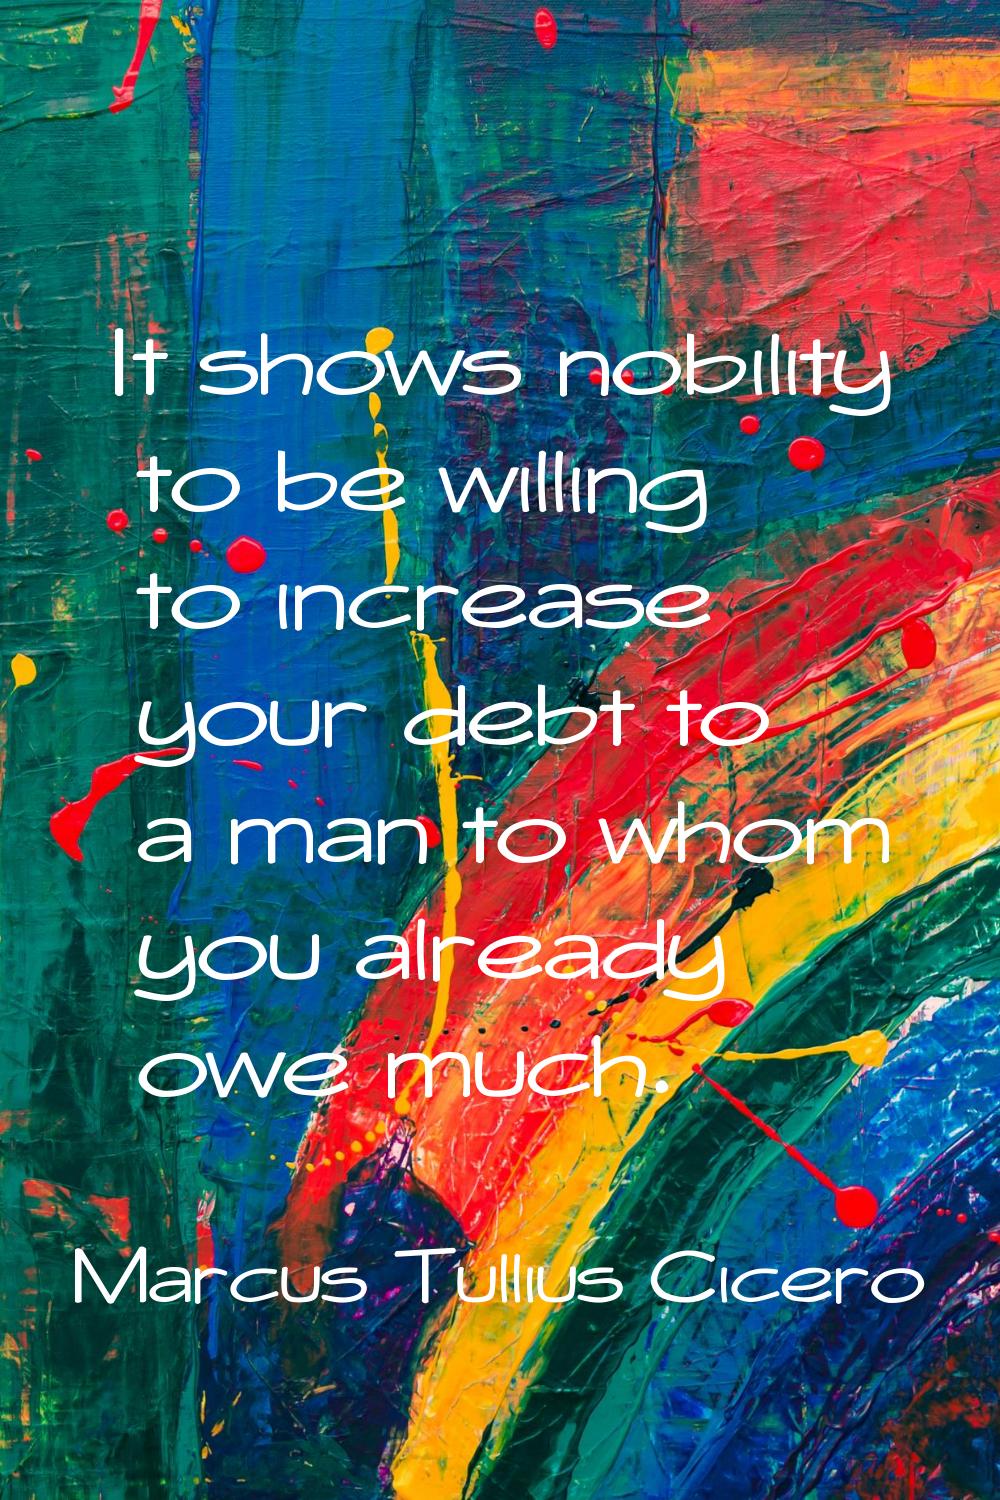 It shows nobility to be willing to increase your debt to a man to whom you already owe much.